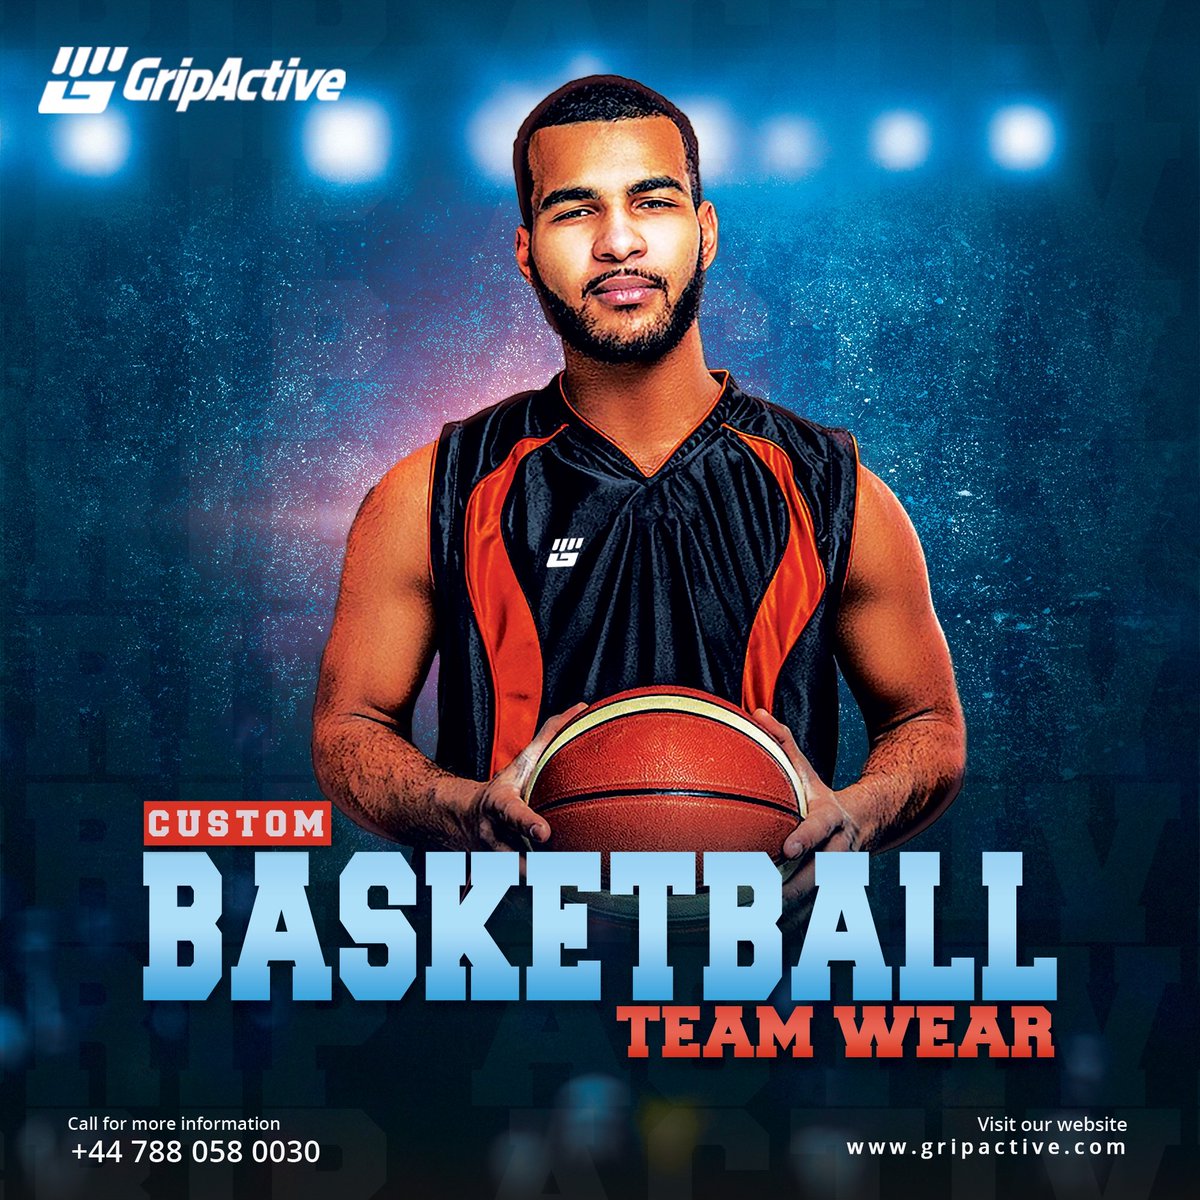 From colors to logos–design the dream. Explore limitless possibilities with our custom basketball kits.🏀 🌐: gripactive.com 📧: sales@gripactive.com ☎️: +44 788 058 0030 #basketball #basketballkit #basketballjersey #ukbasketball #ukbasketballteam #custombasketballkit